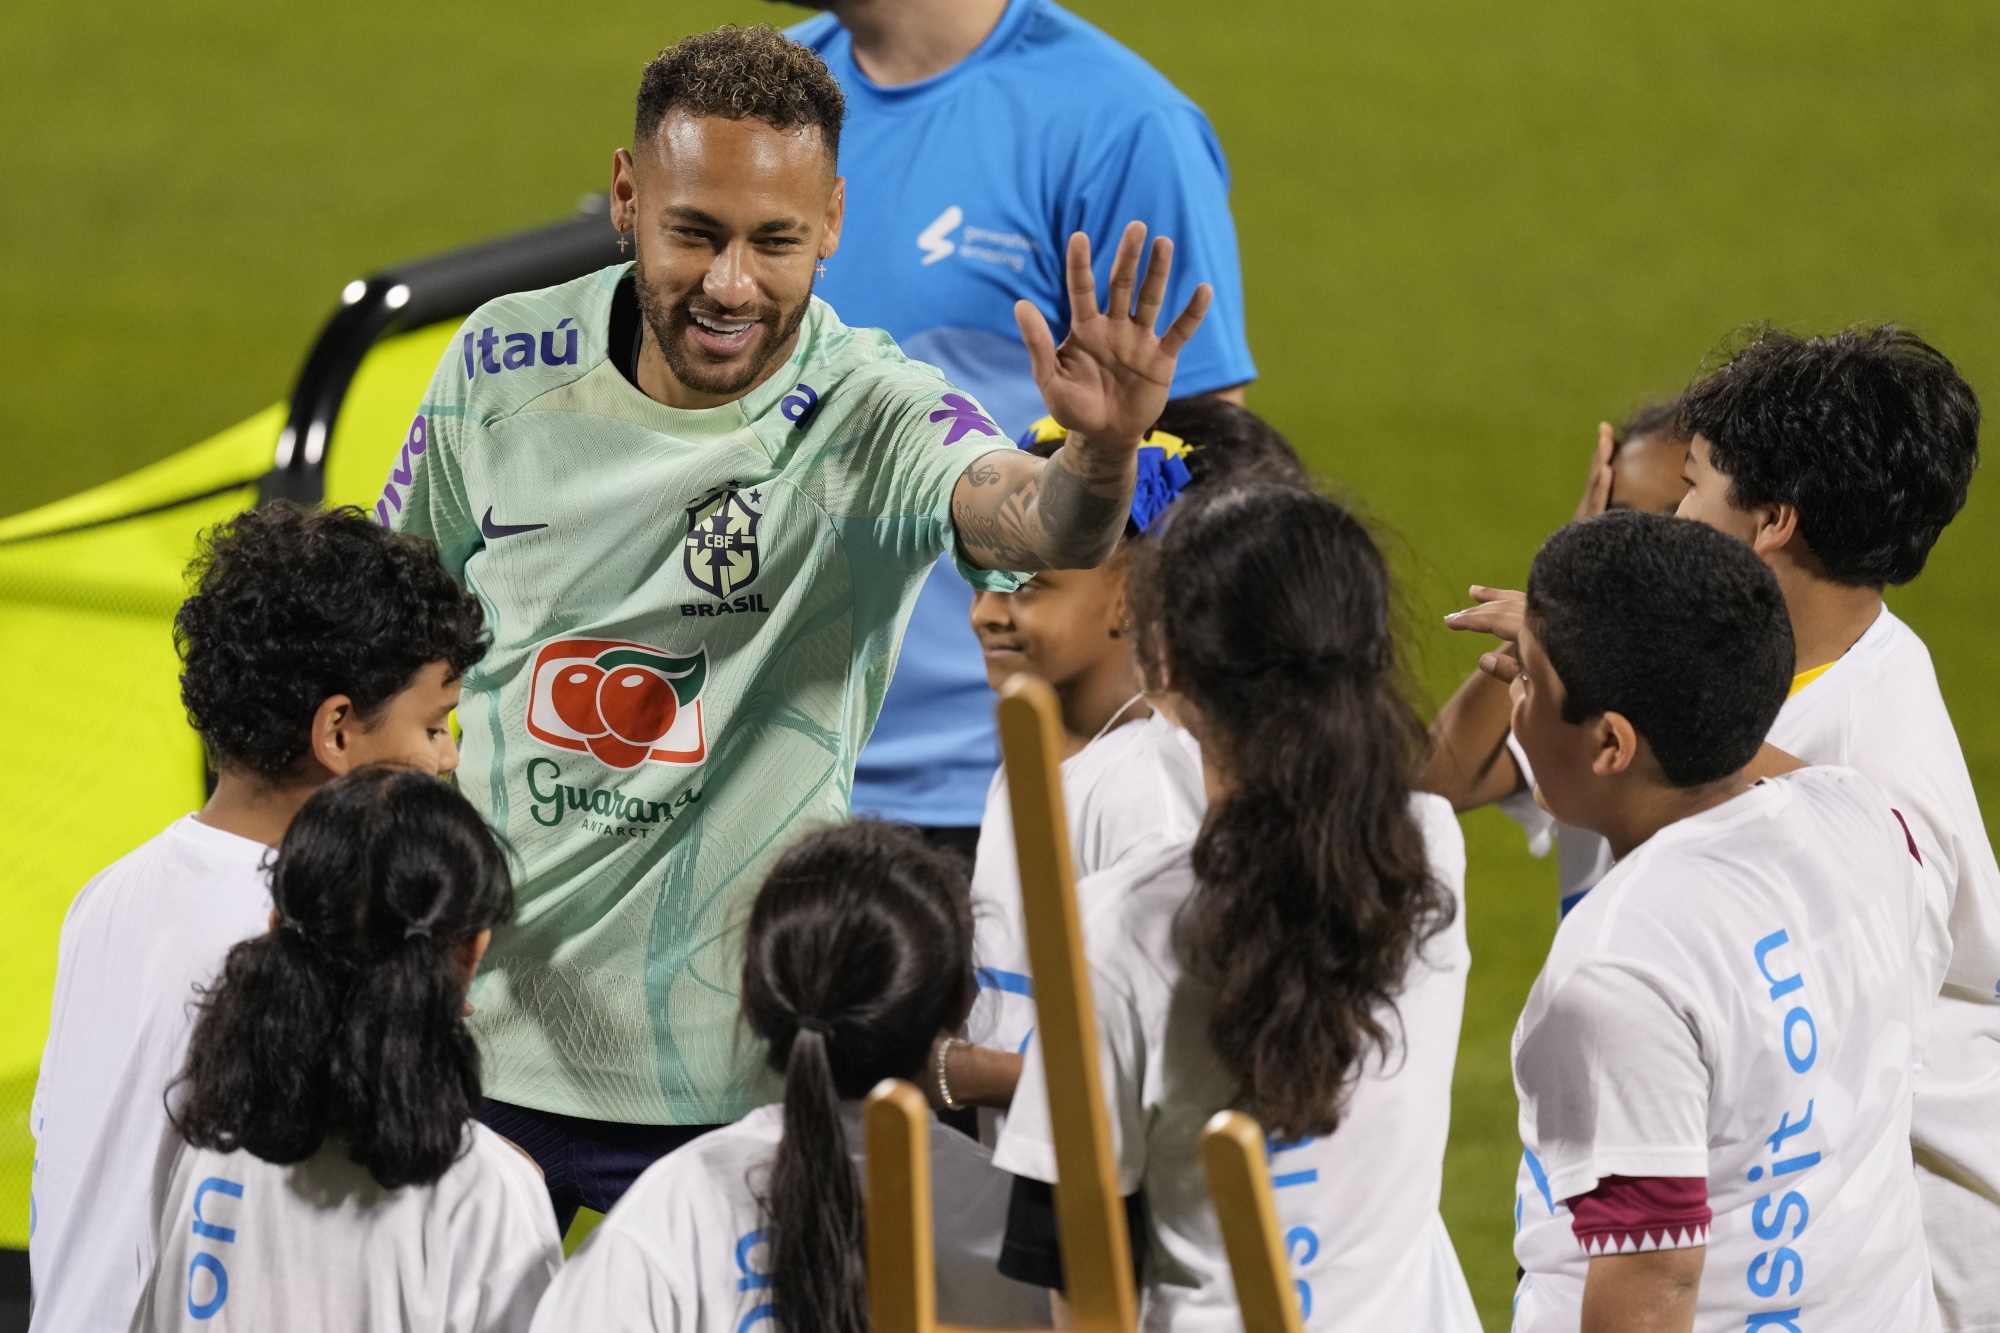 Neymar to Miss Brazil's Last Group Game At World Cup - Bloomberg